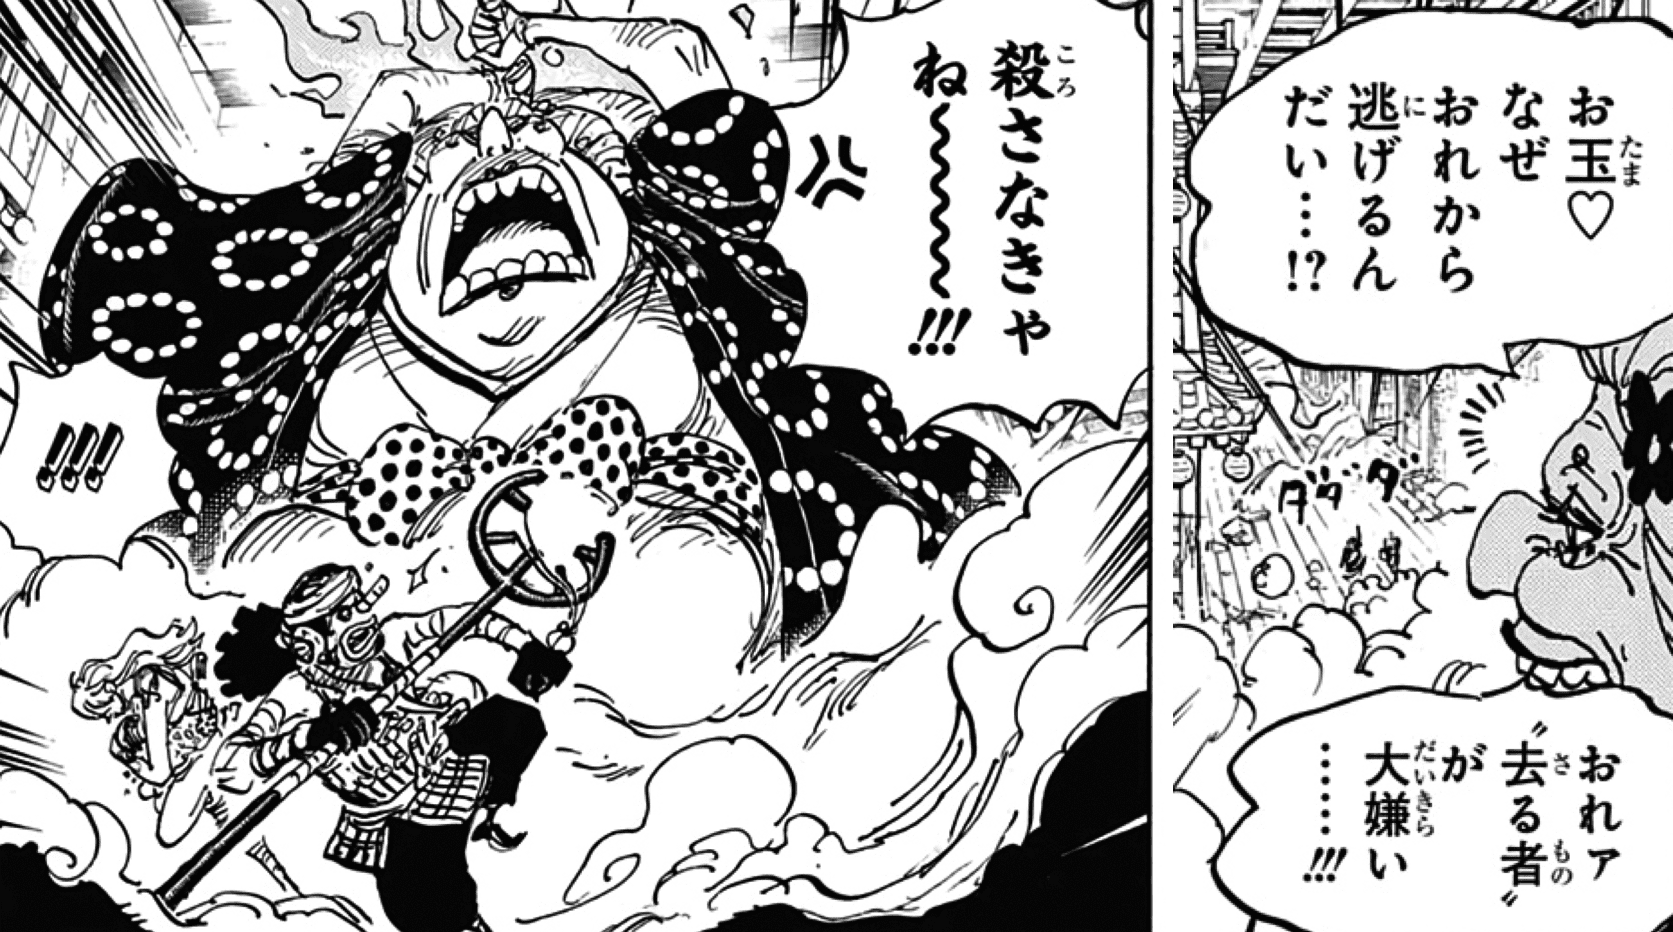 ONEPIECE 1013「Anarchy In The BM」 | 我思う故に・・・新館我思う 